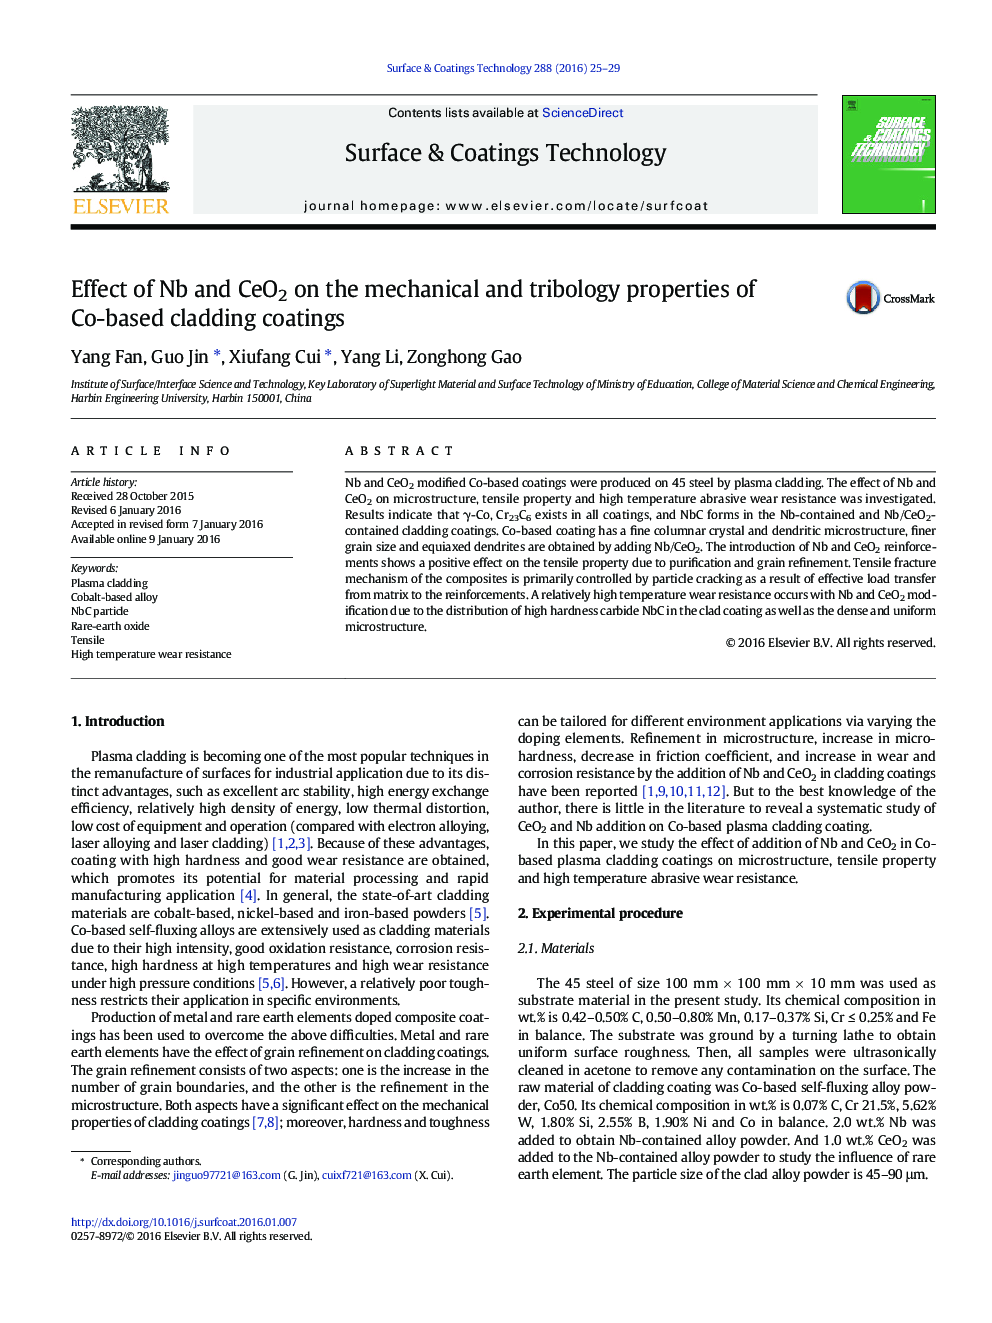 Effect of Nb and CeO2 on the mechanical and tribology properties of Co-based cladding coatings